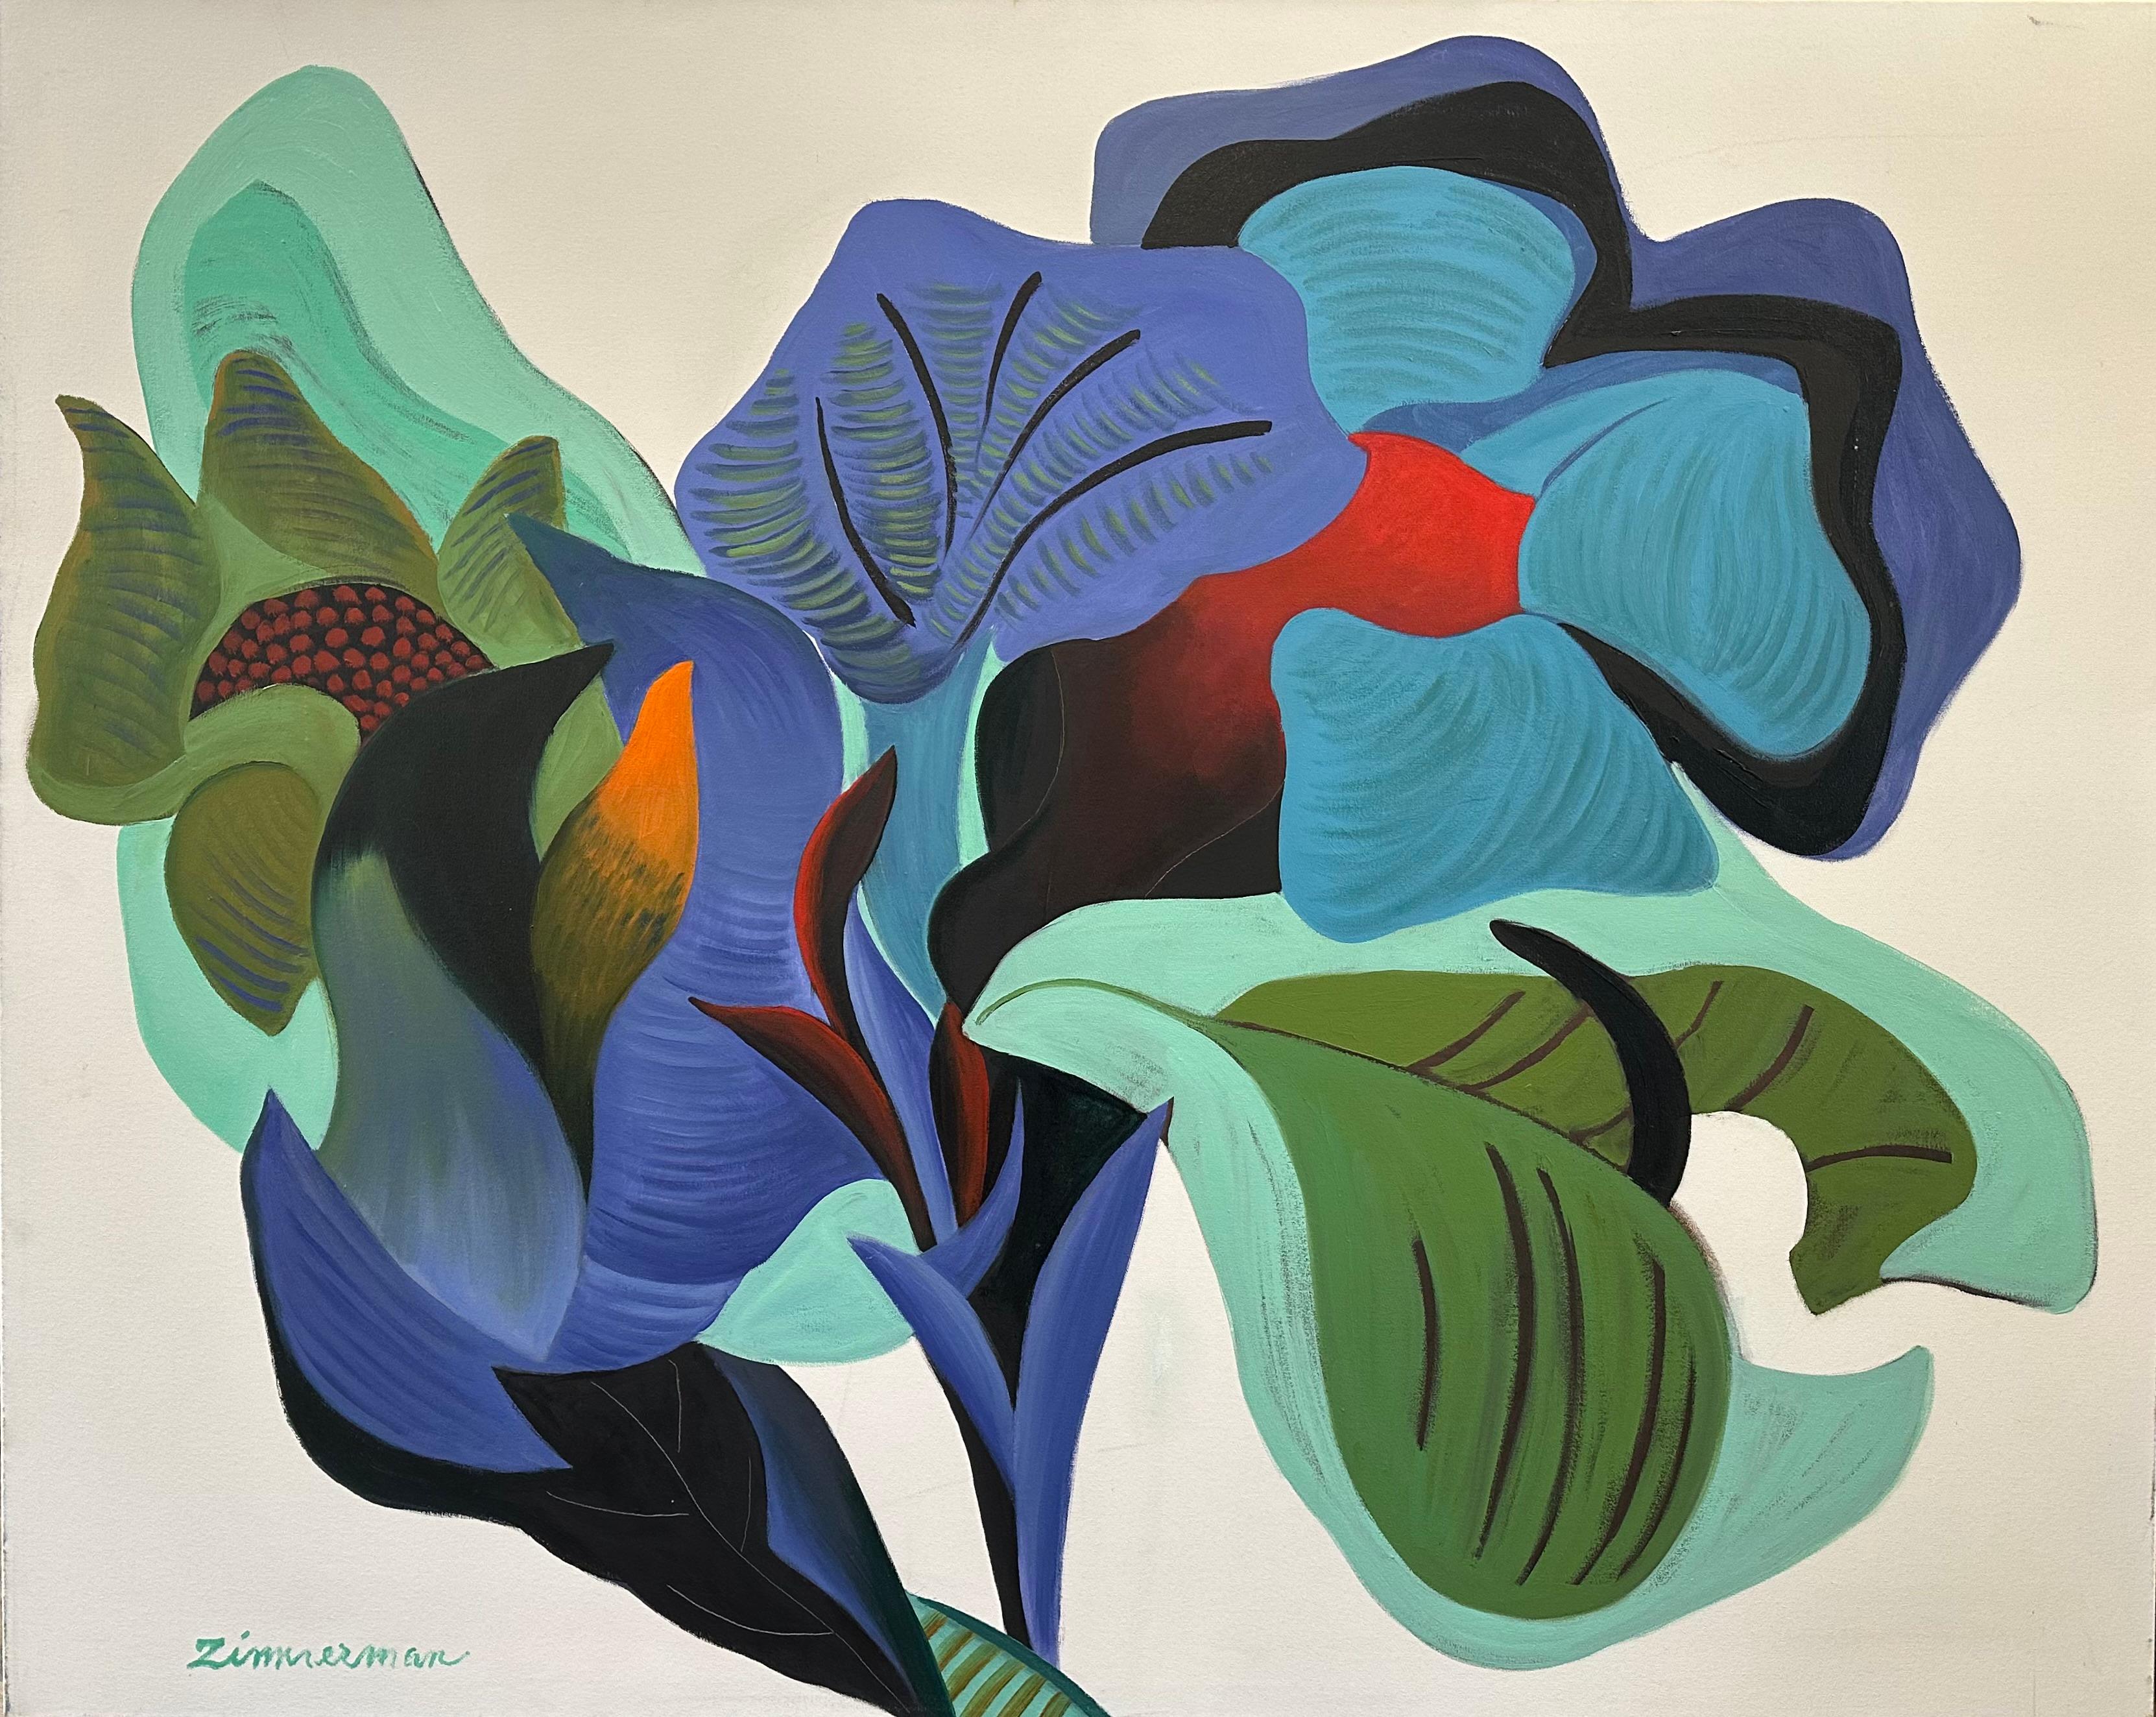 symbiotic Growth - Floral Abstract Painting By Marc Zimmerman

This masterpiece is exhibited in the Zimmerman Gallery, Carmel CA.


Marc Zimmerman creates playful paintings, whether deep mysterious jungle or delightfully whimsical florals. His color